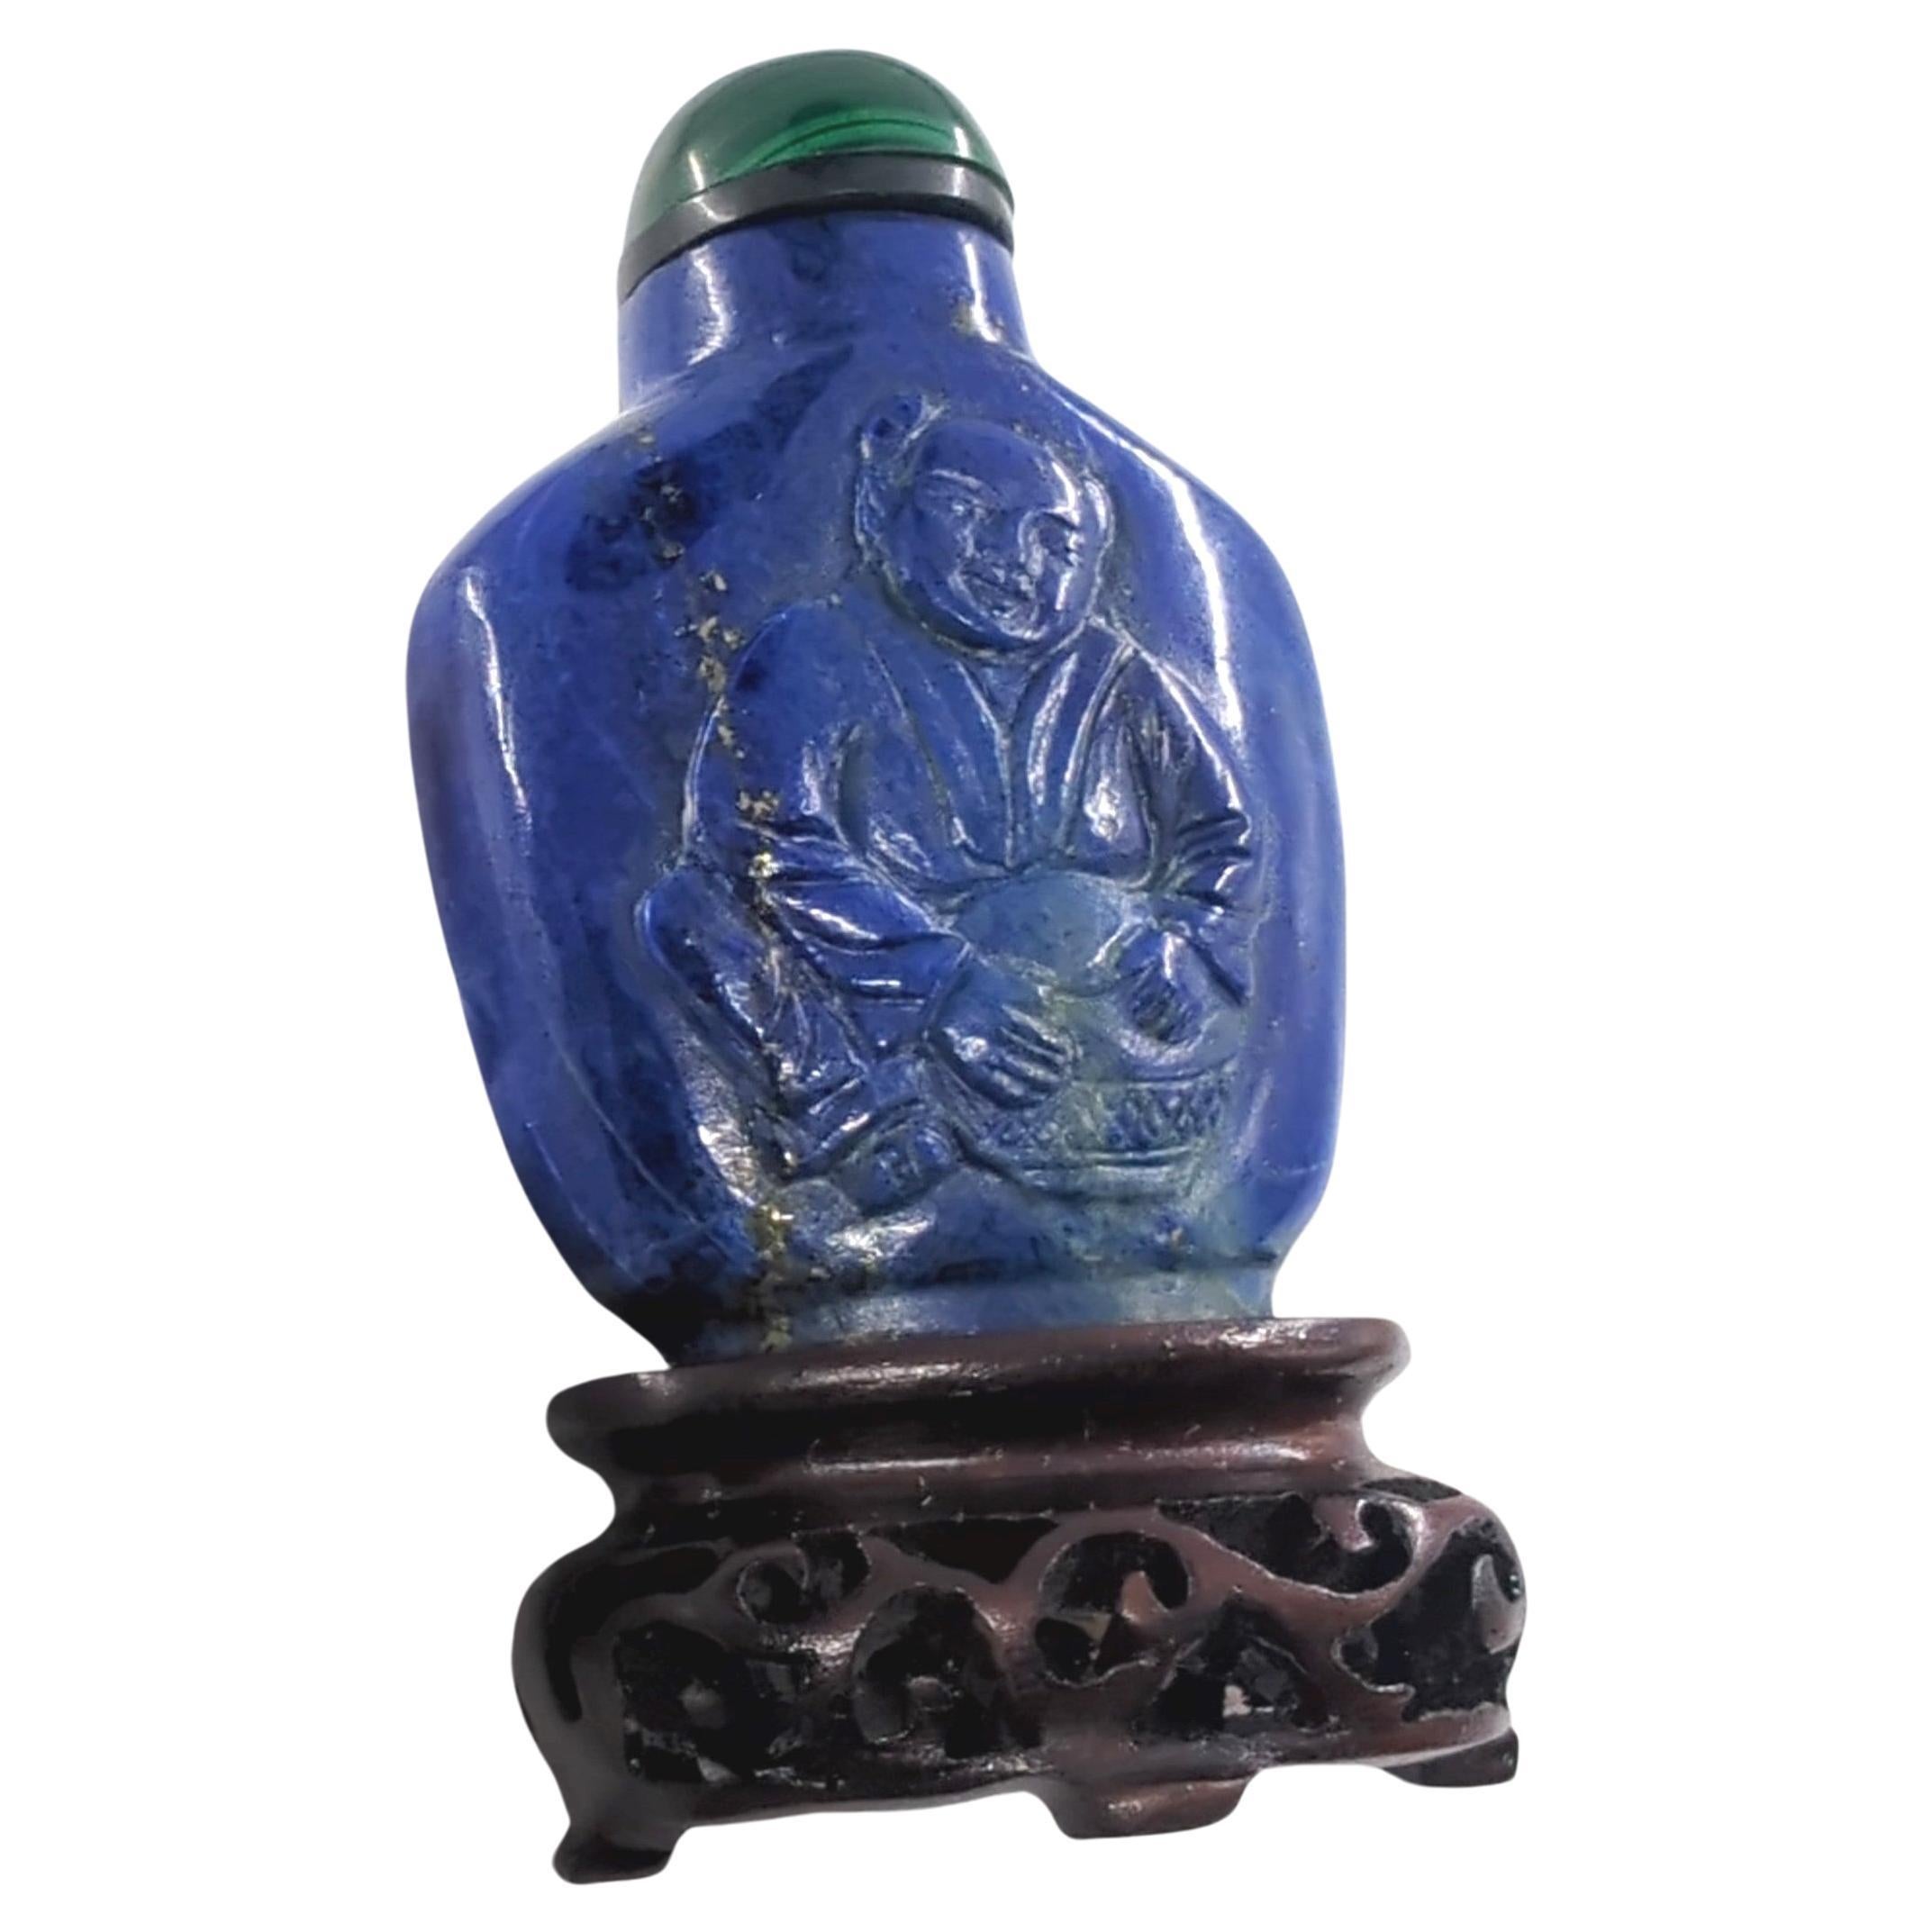 Antique Chinese hand carved lapis lazuli snuff bottle, relief carved with a boy figure to one side, and a flying bat to the other side, having a dished mouth and raised on a deep carved footring, with a green malachite stopper and a matching wood